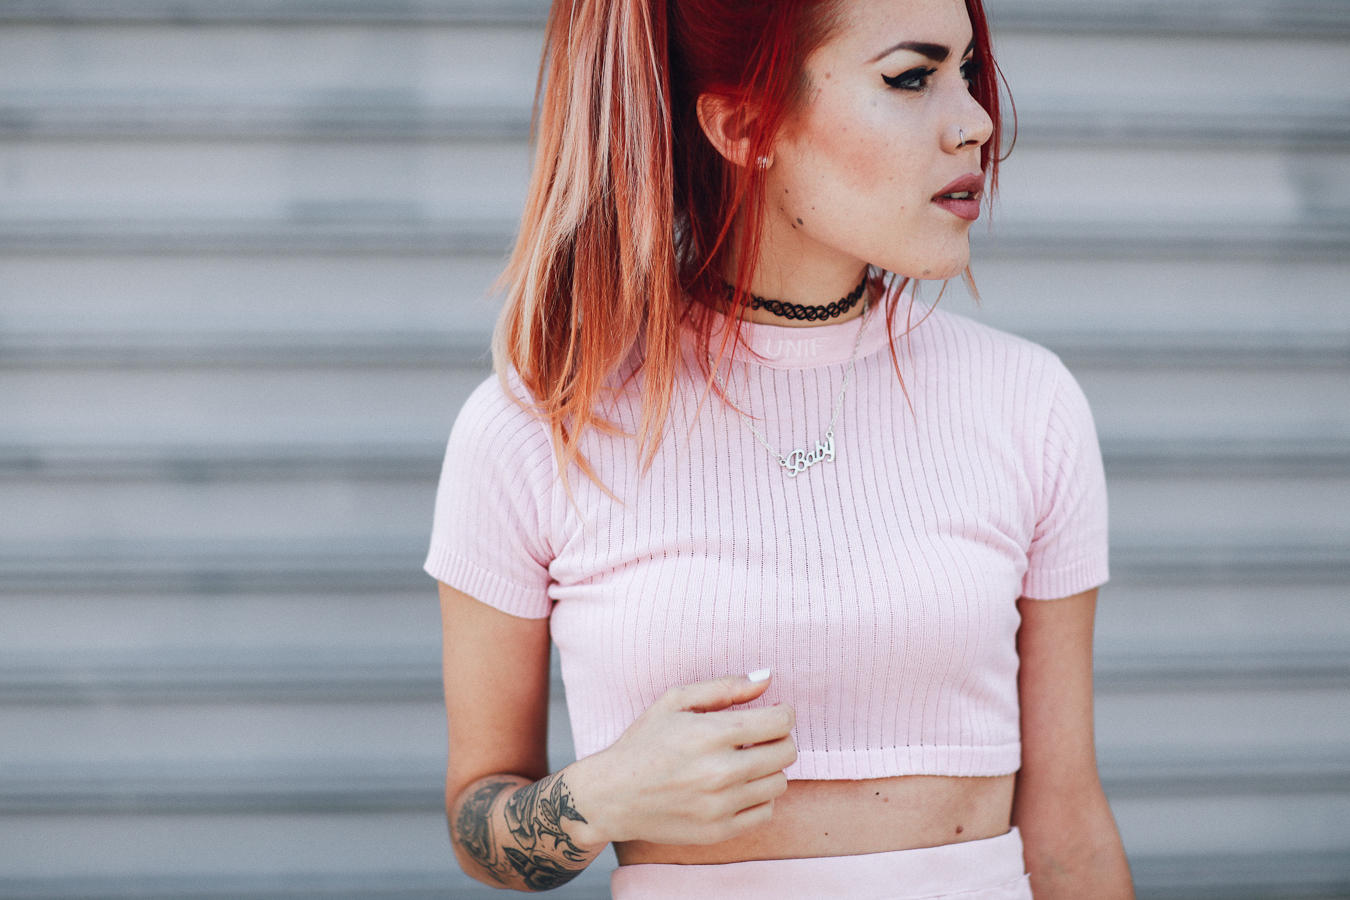 Le Happy wearing a pastel pink unif crop top